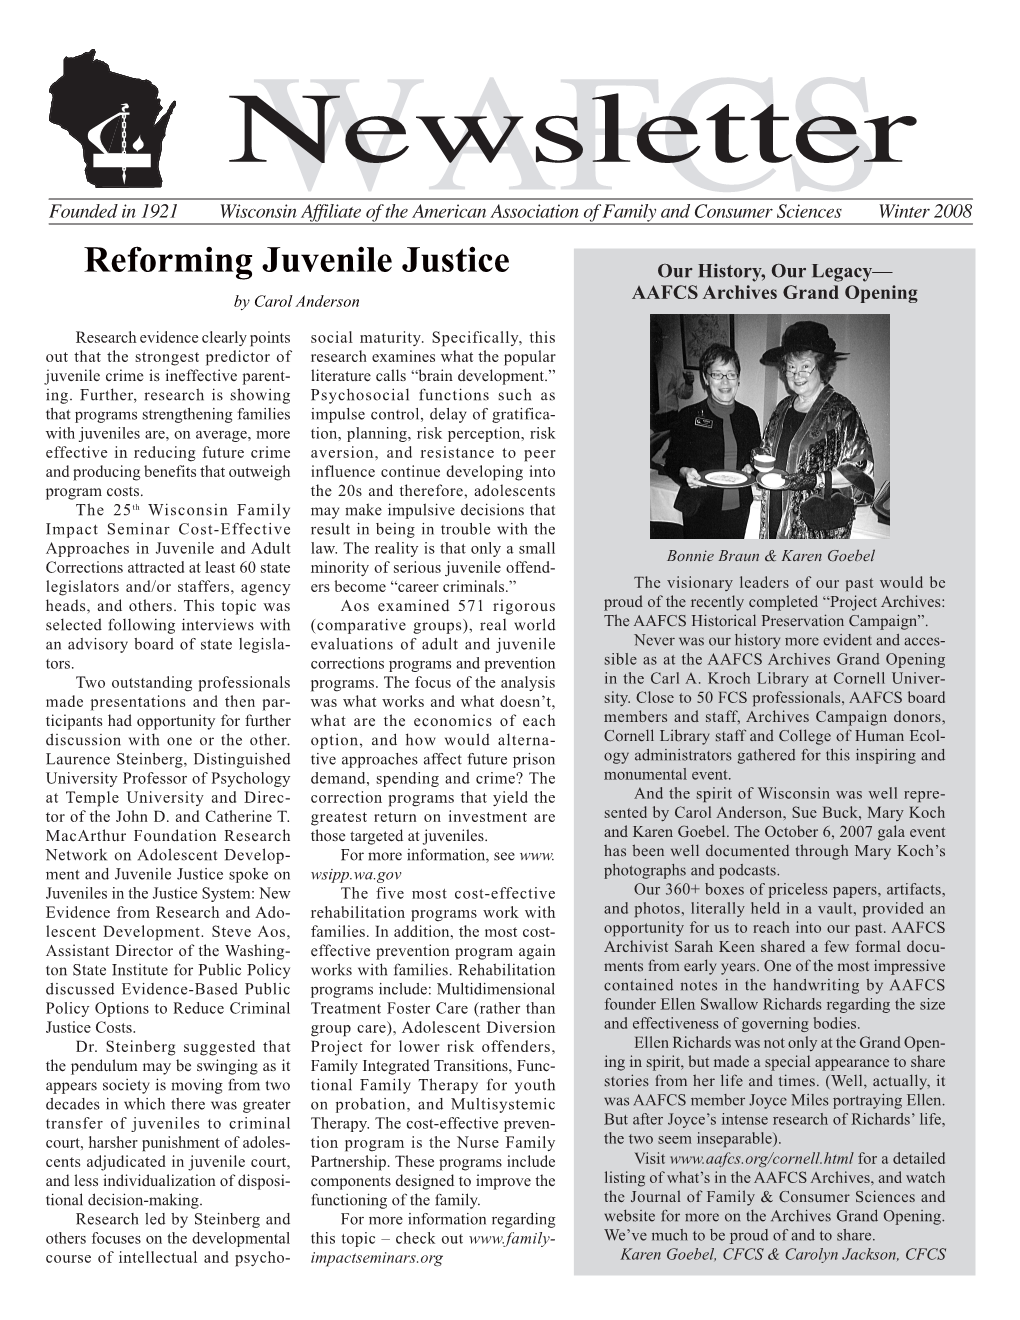 Newsletter Founded in 1921 Wisconsinwafcs Affiliate of the American Association of Family and Consumer Sciences Winter 2008